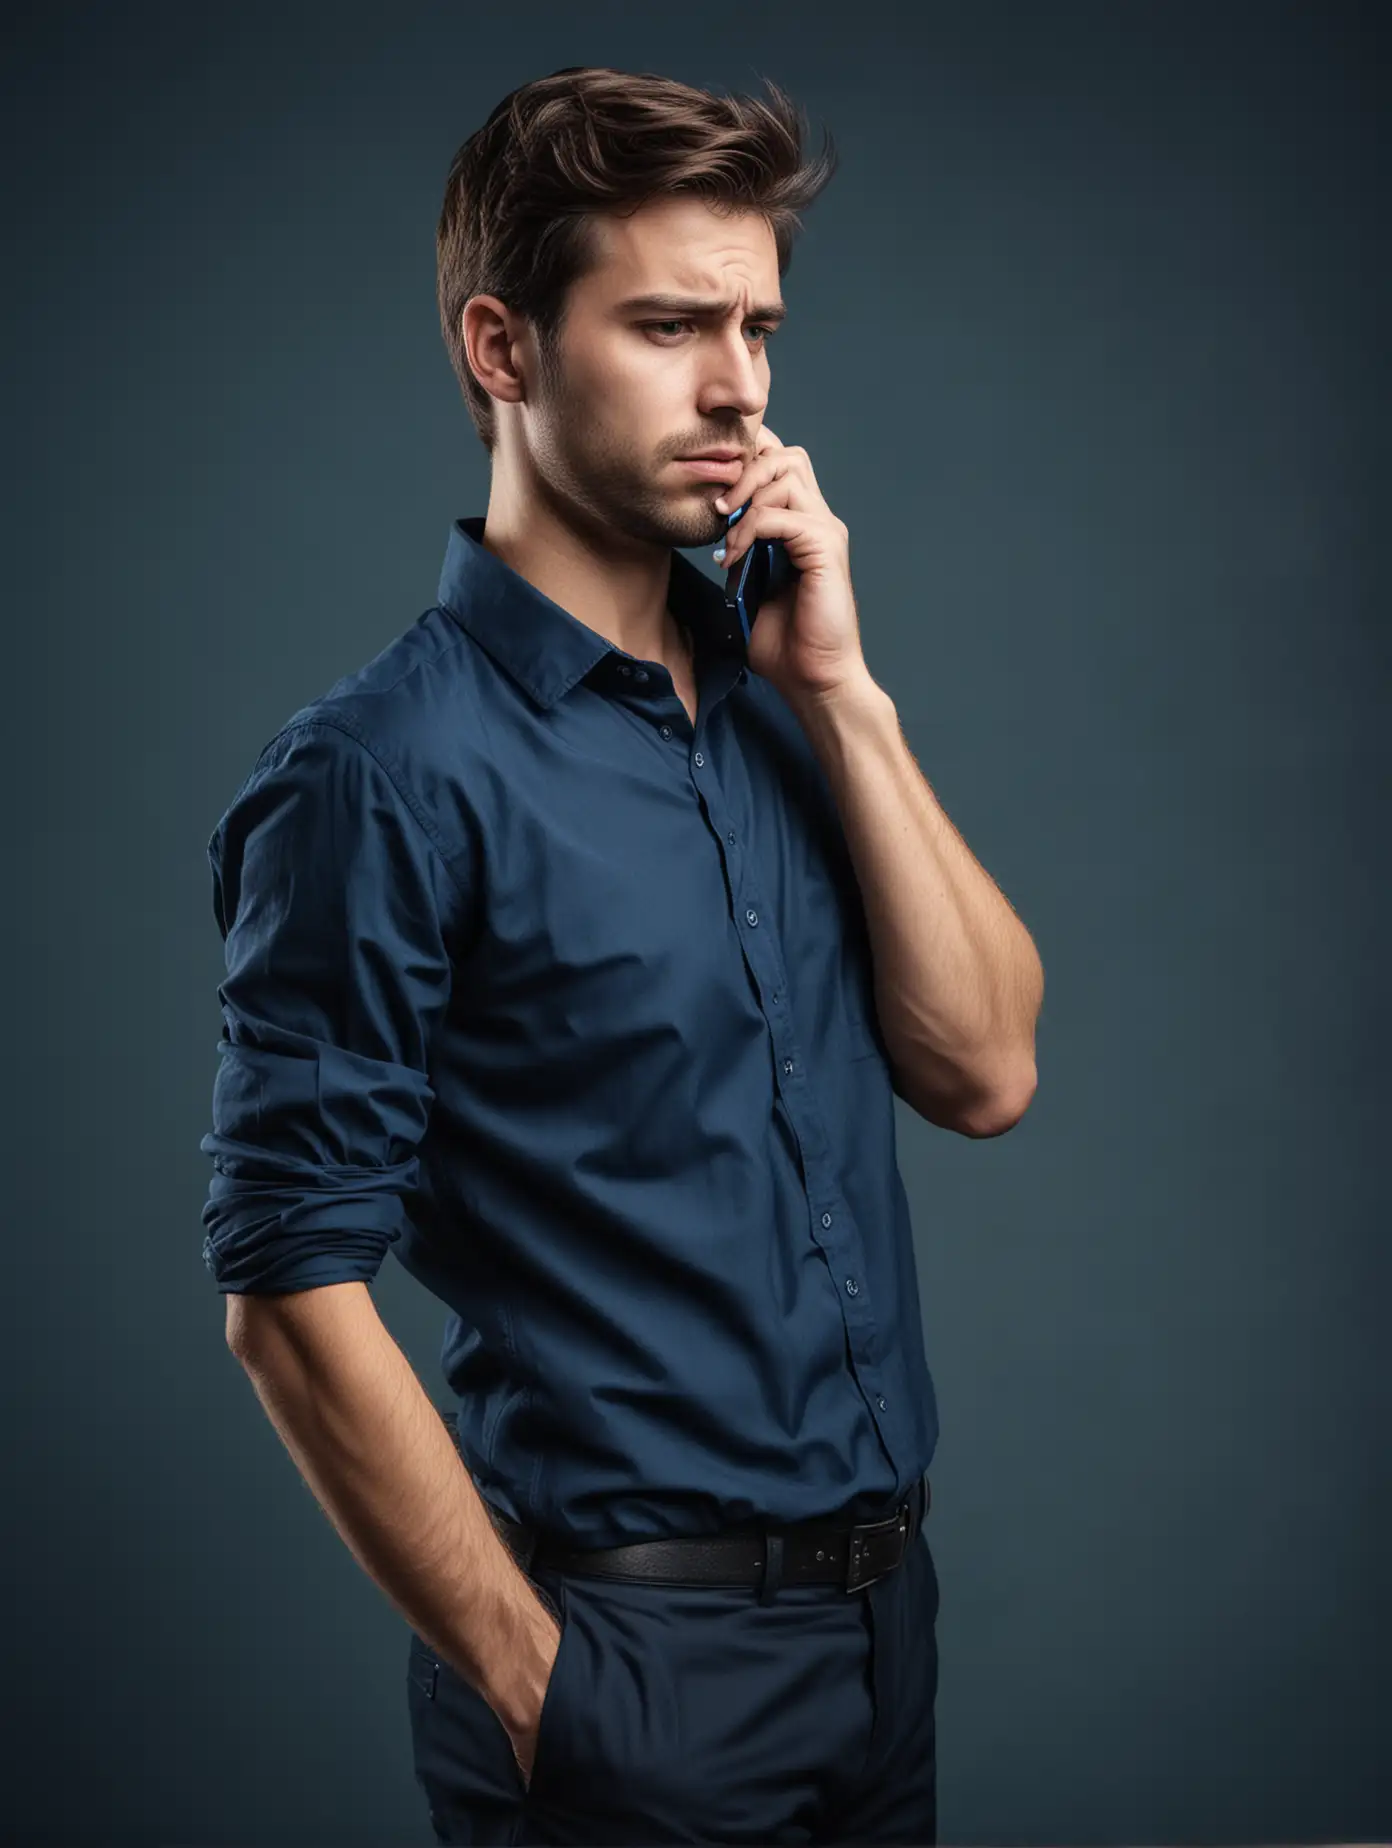 Unhappy Casual Sales Rep Calling on Mobile Phone in Dark Blue Setting